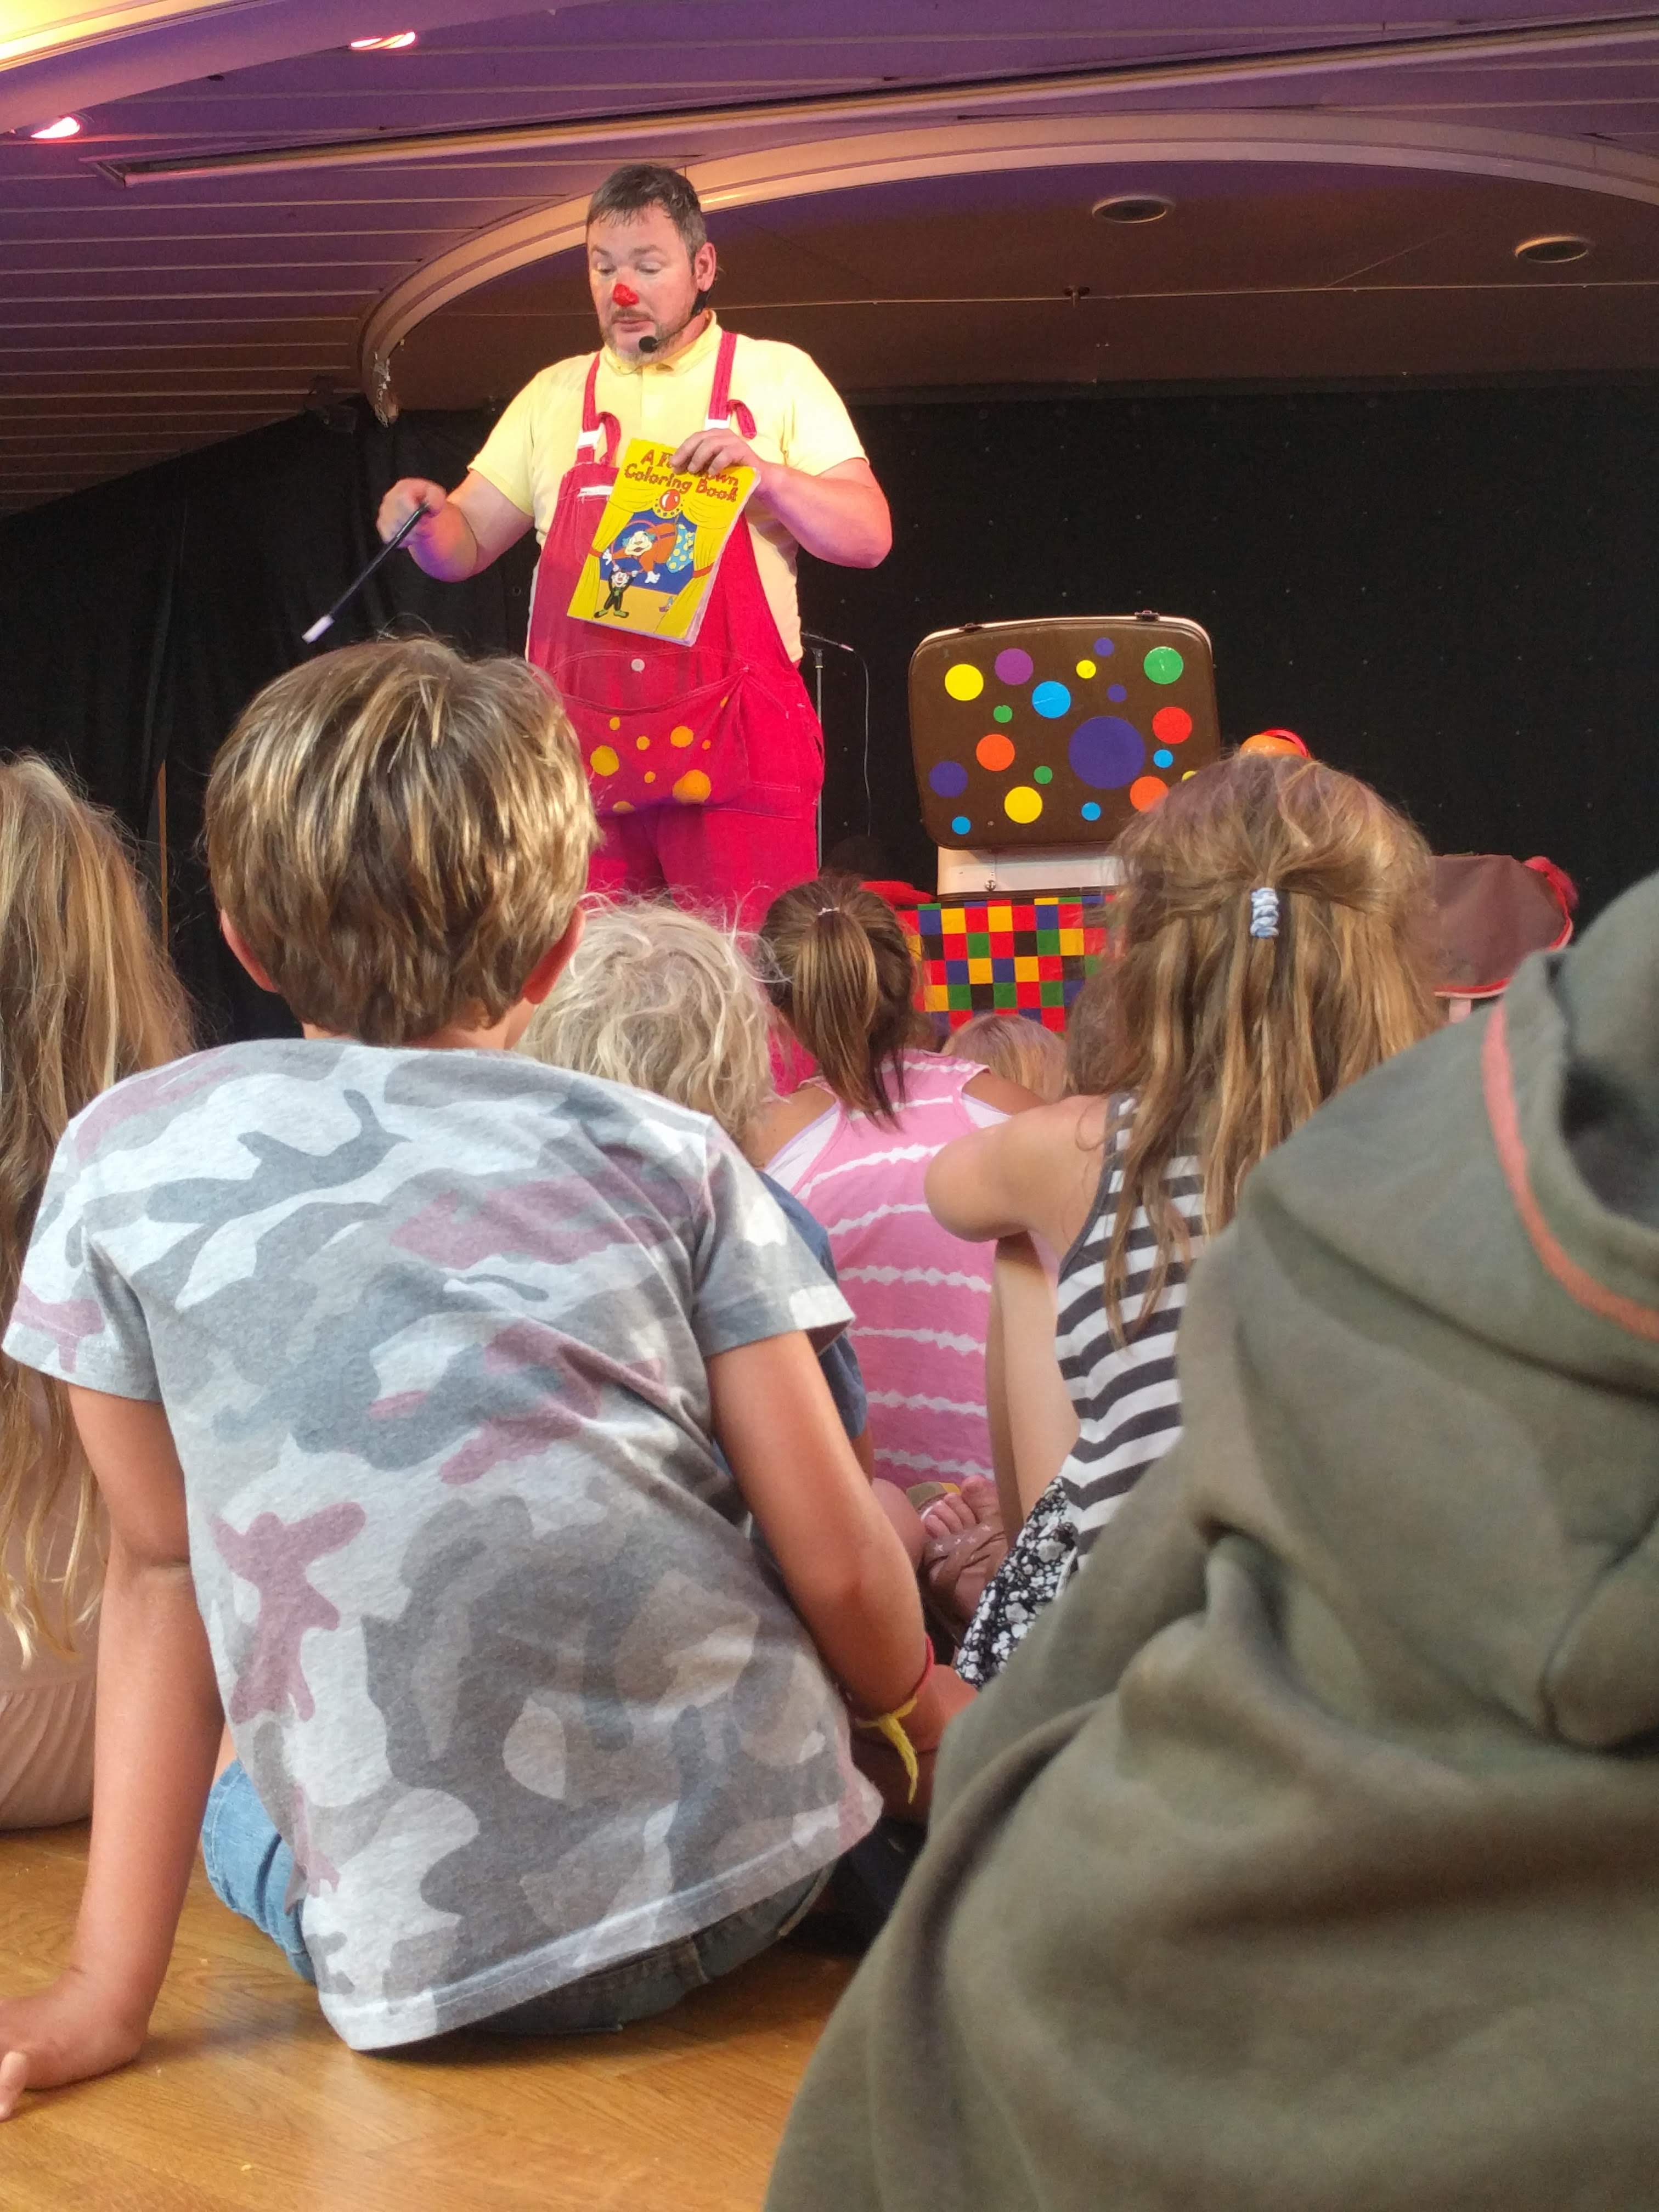 Curley Wurley Clown performing his stage show for some children onboard Brittany Ferries